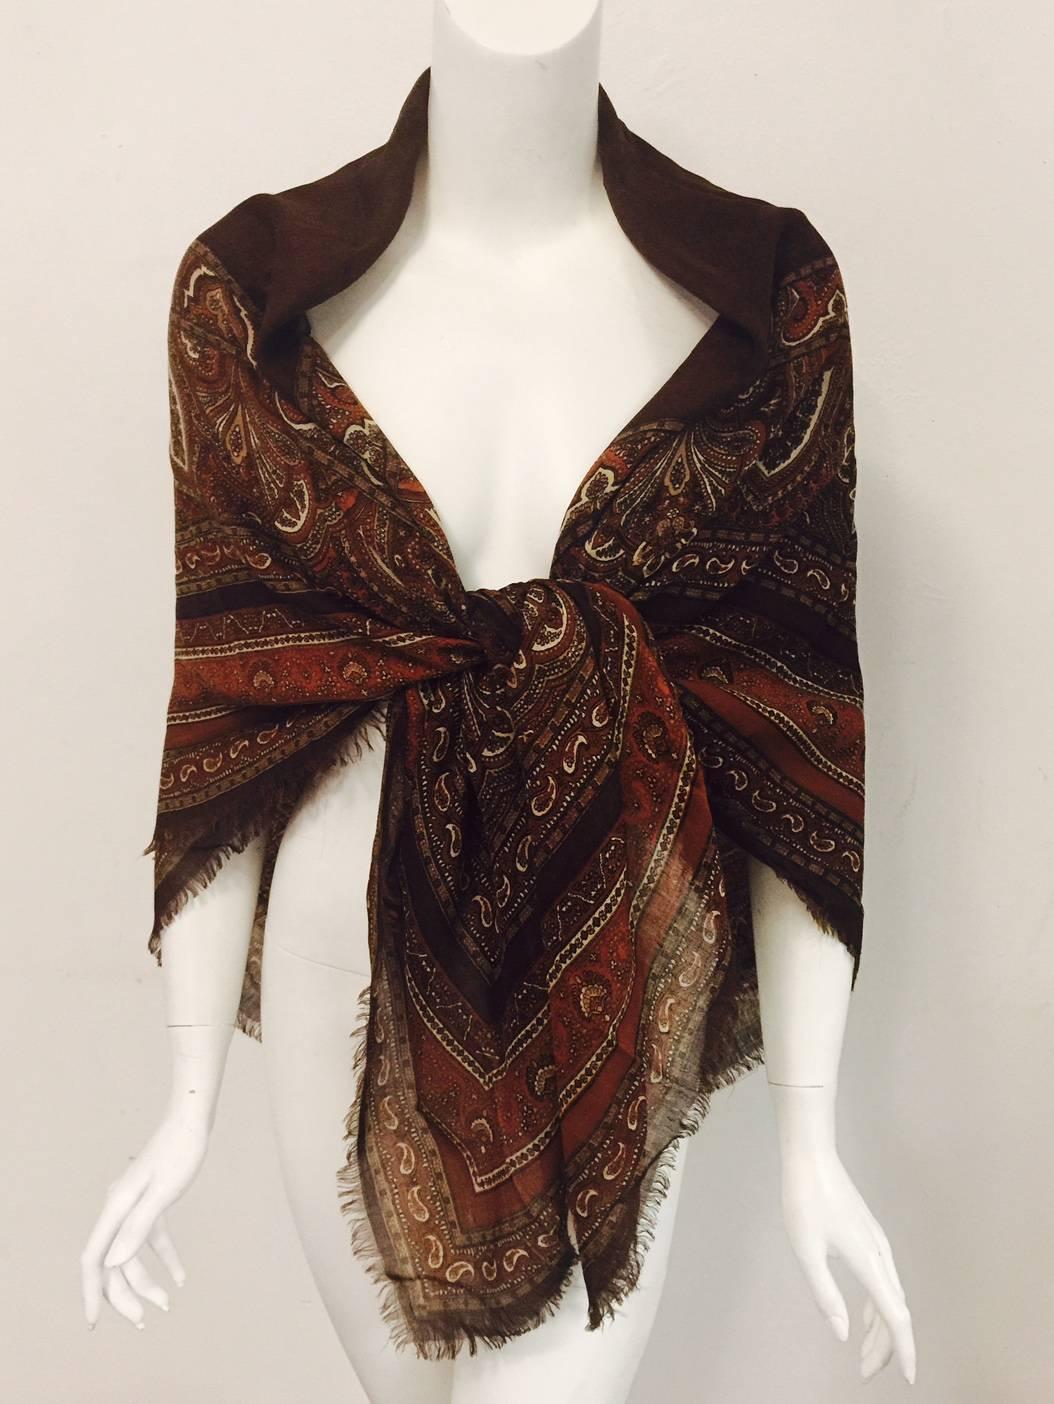 Featuring ultra-luxurious Wool and Silk Etamine blend, this vintage YSL Wool and Silk Etamine Paisley Shawl is a must for any sophisticated wardrobe.  Ageless, classic styling and warm colors, including chocolate, burnt orange, and parchment,